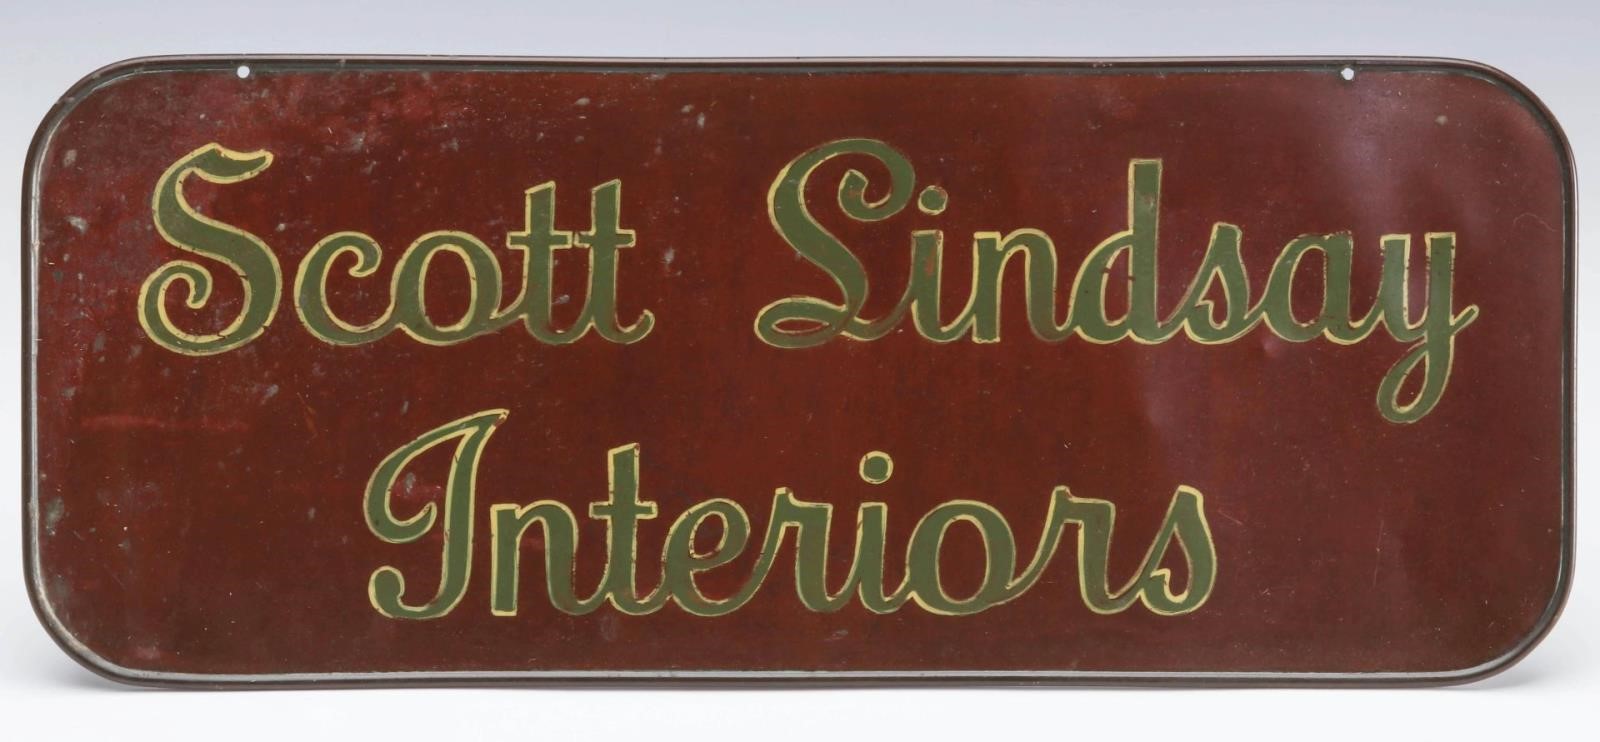 Aug 17 2017 Inventory from Scott Lindsay Interiors